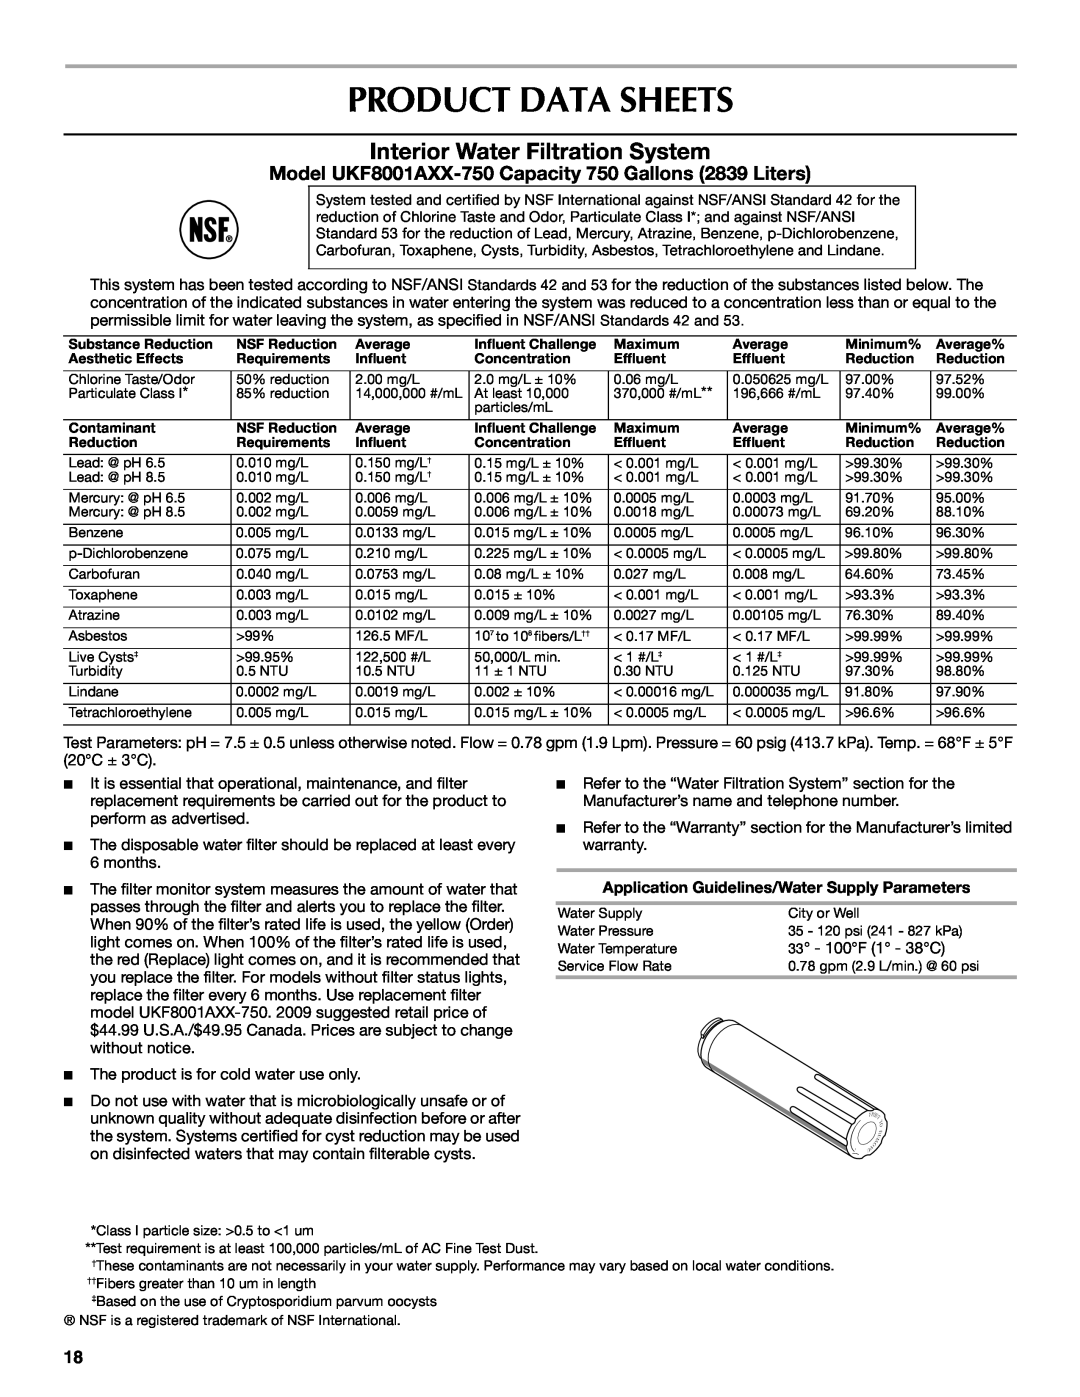 Maytag MFX2571XEW, W10295064A, W10294936A installation instructions Product Data Sheets, Interior Water Filtration System 